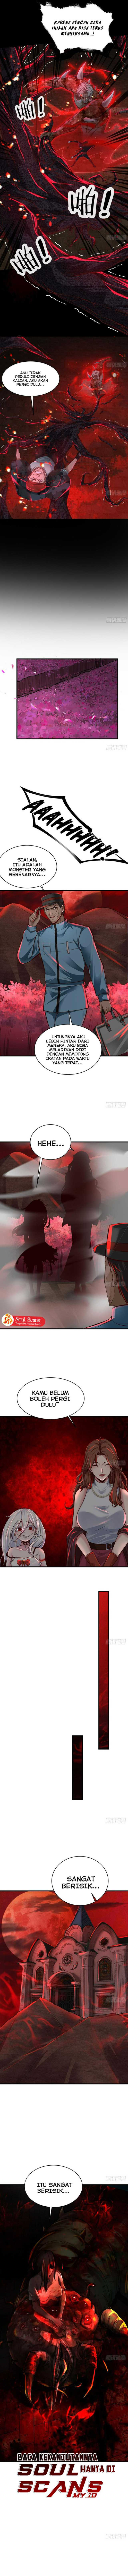 Since The Red Moon Appeared (Hongyue Start) Chapter 69